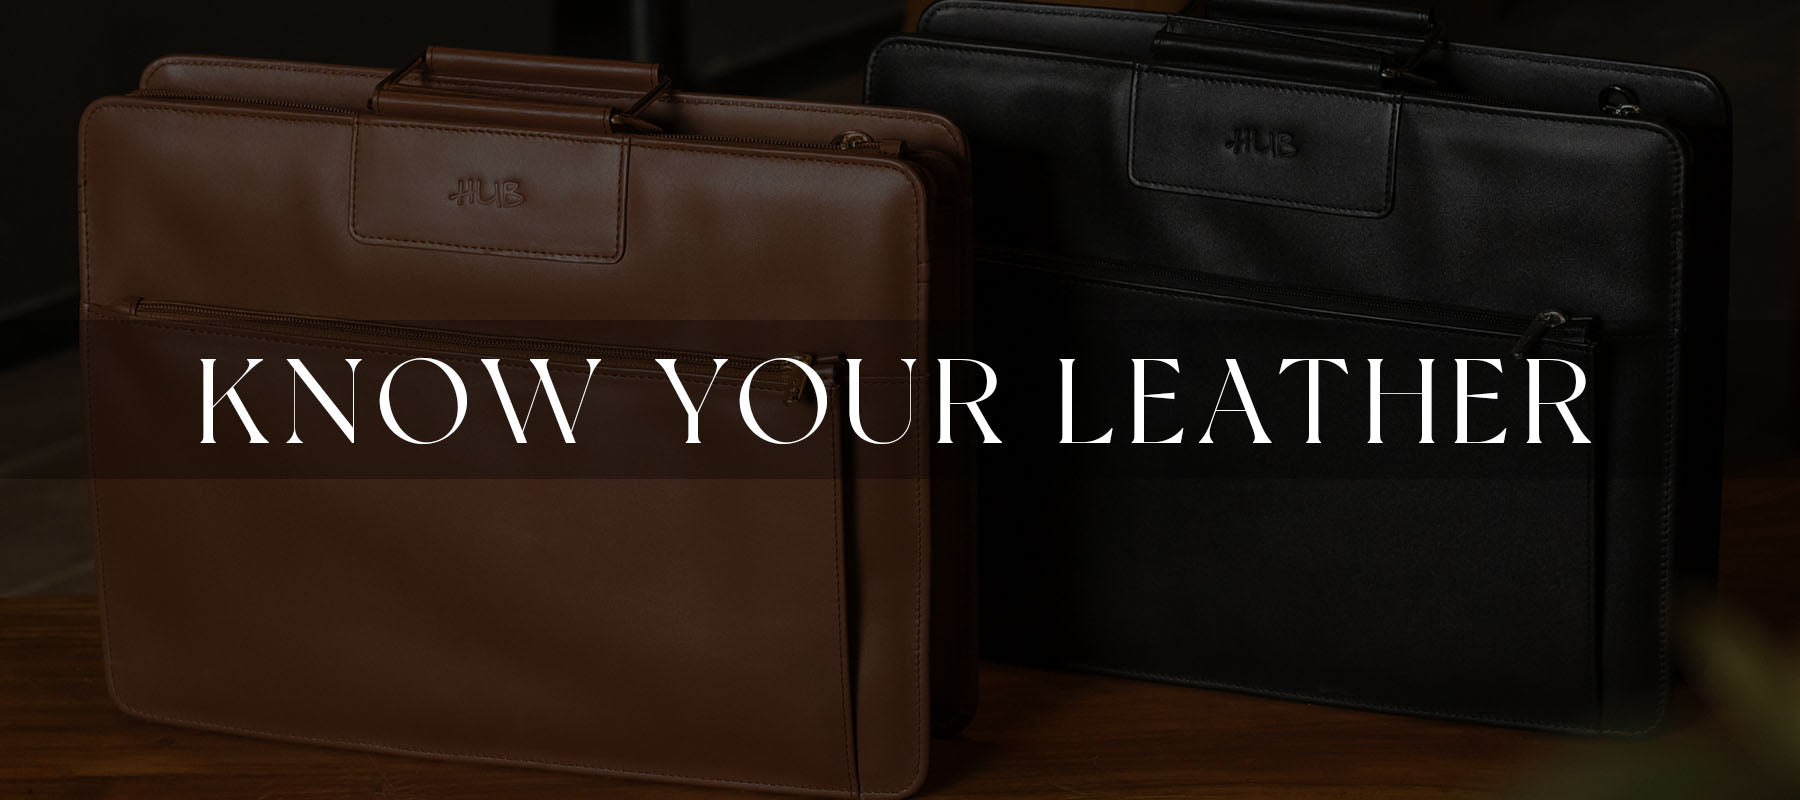 KNOW YOUR LEATHER – HUB